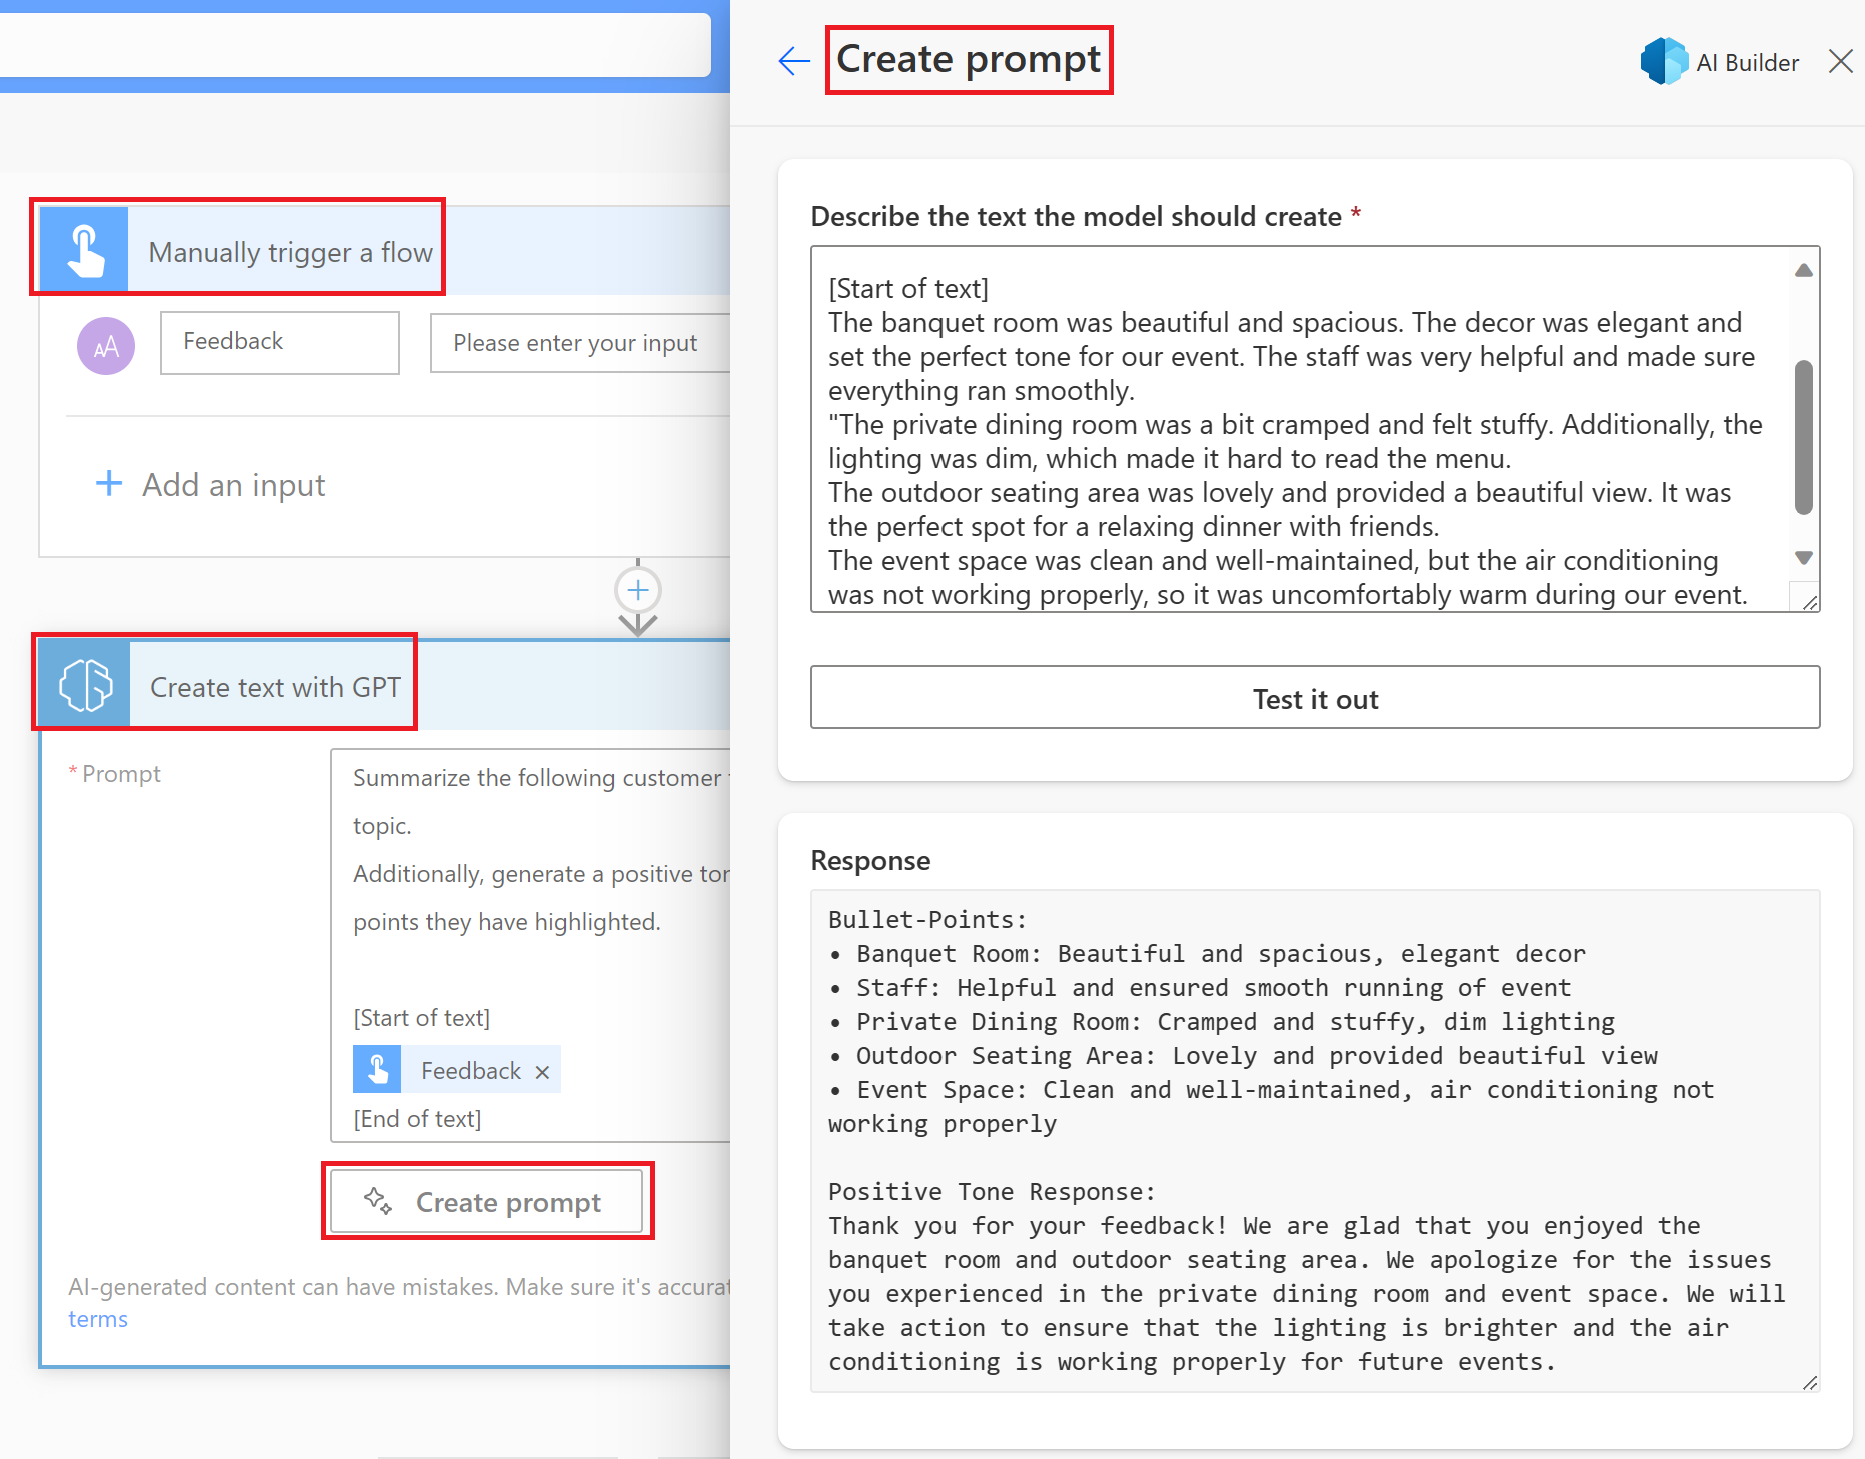 Screenshot of the Create prompt page in Power Automate.